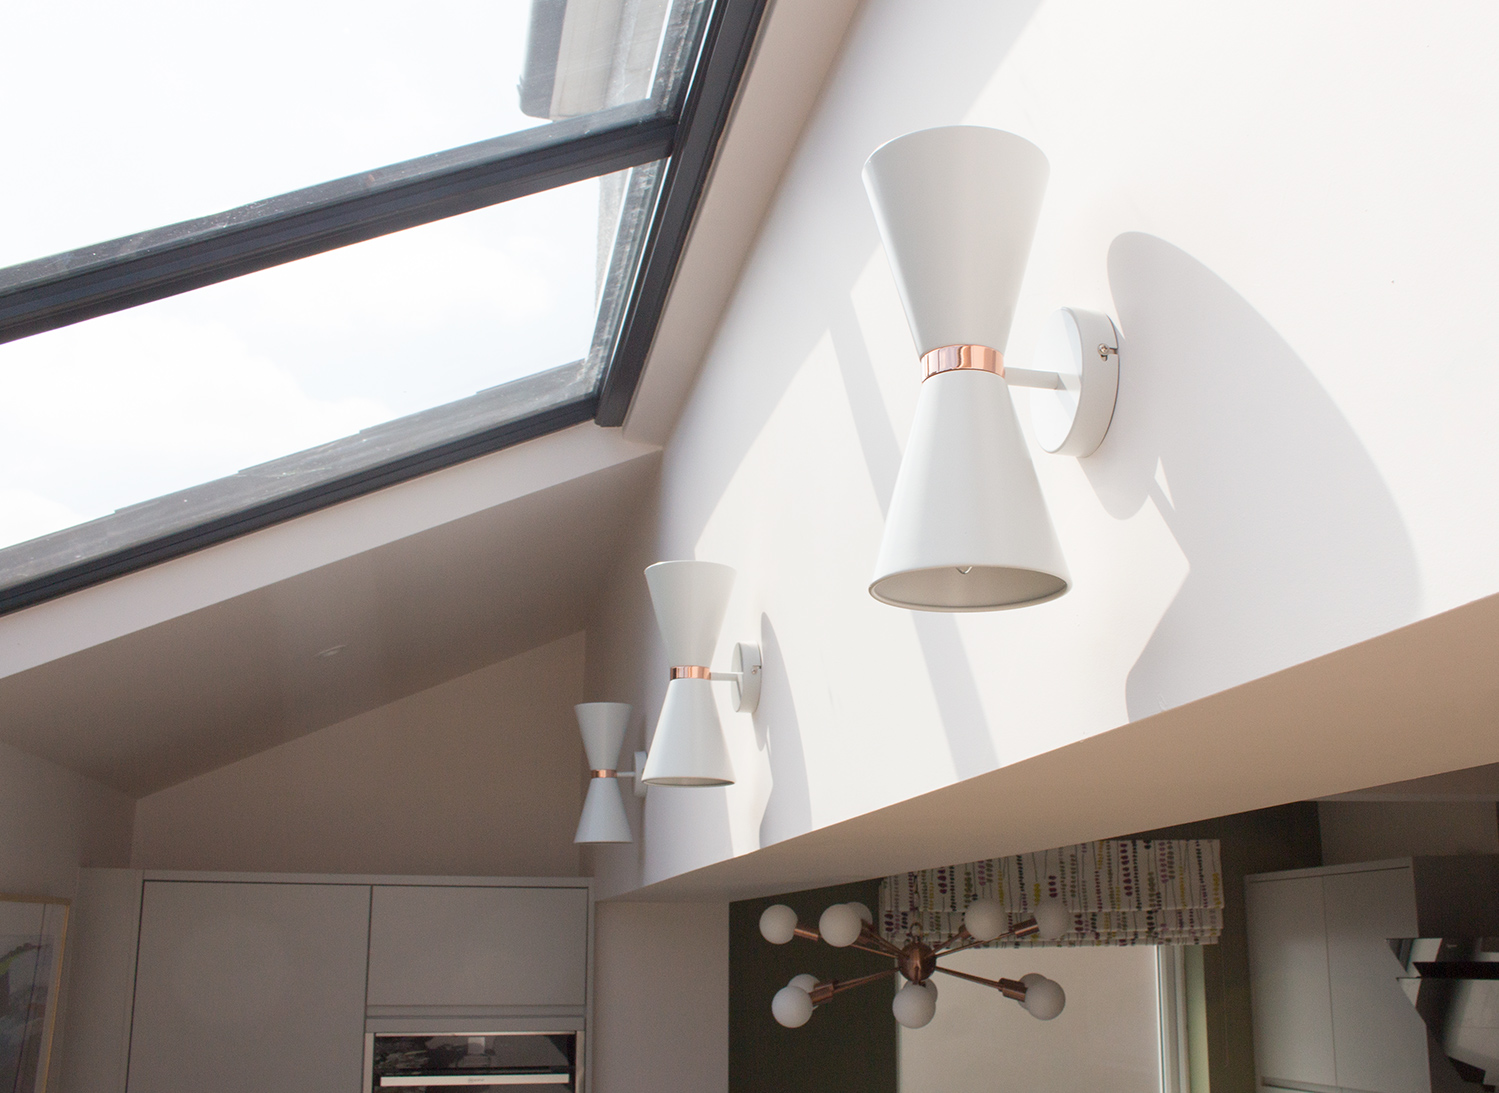 A photo of three wall lights with an interesting shape on a blank wall in a kitchen.